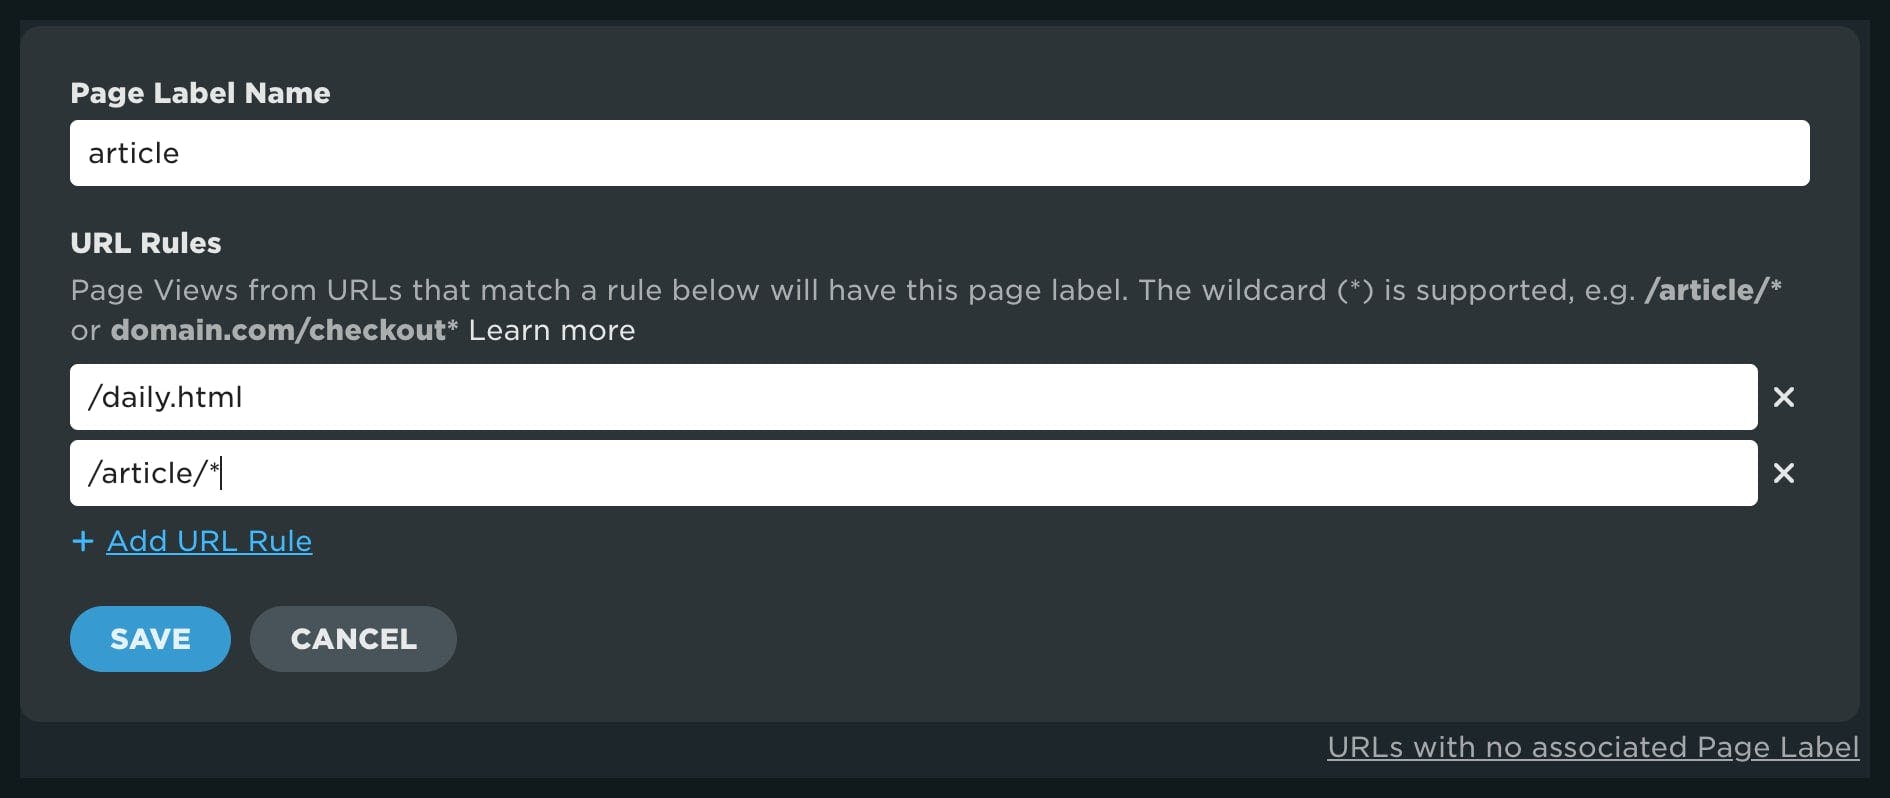 A new page label rule called 'article' being created with an absolute path and a path containing a wildcard